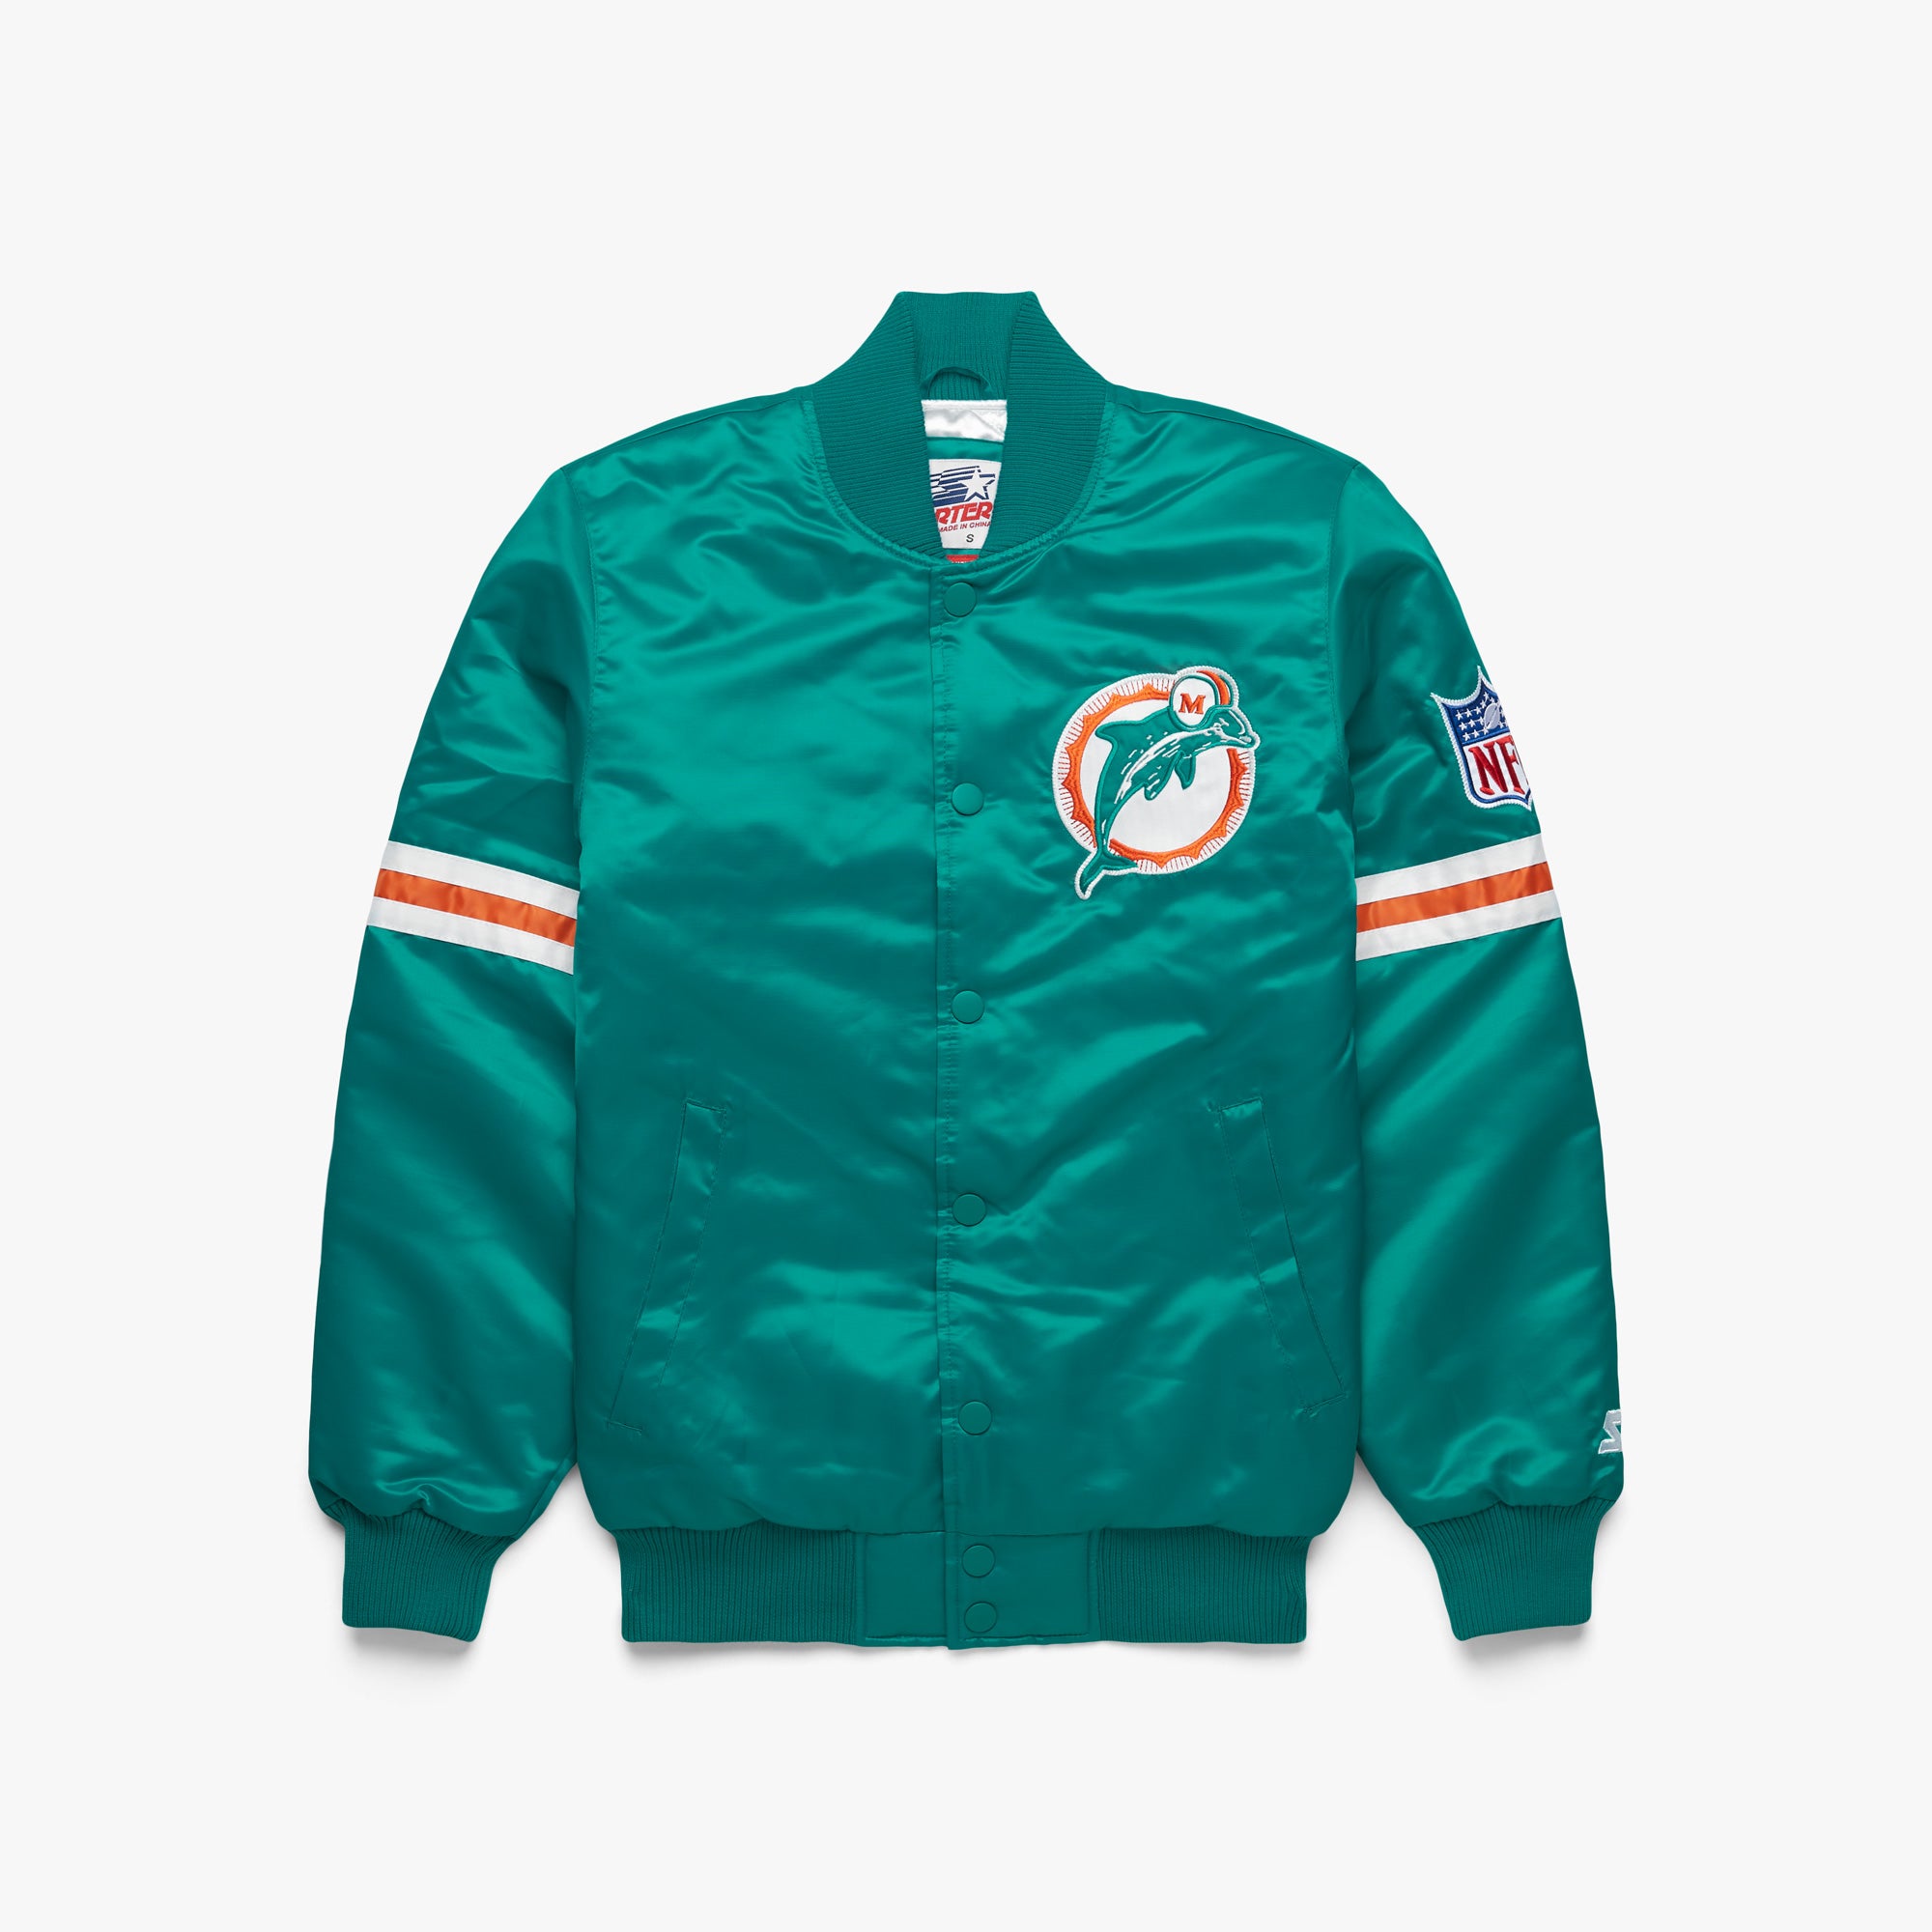 Homage x Starter Miami Dolphins Satin Jacket from Homage. Officially Licensed NFL Apparel. Shop Pro 80's Starter, Gameday, & Bomber Jackets.